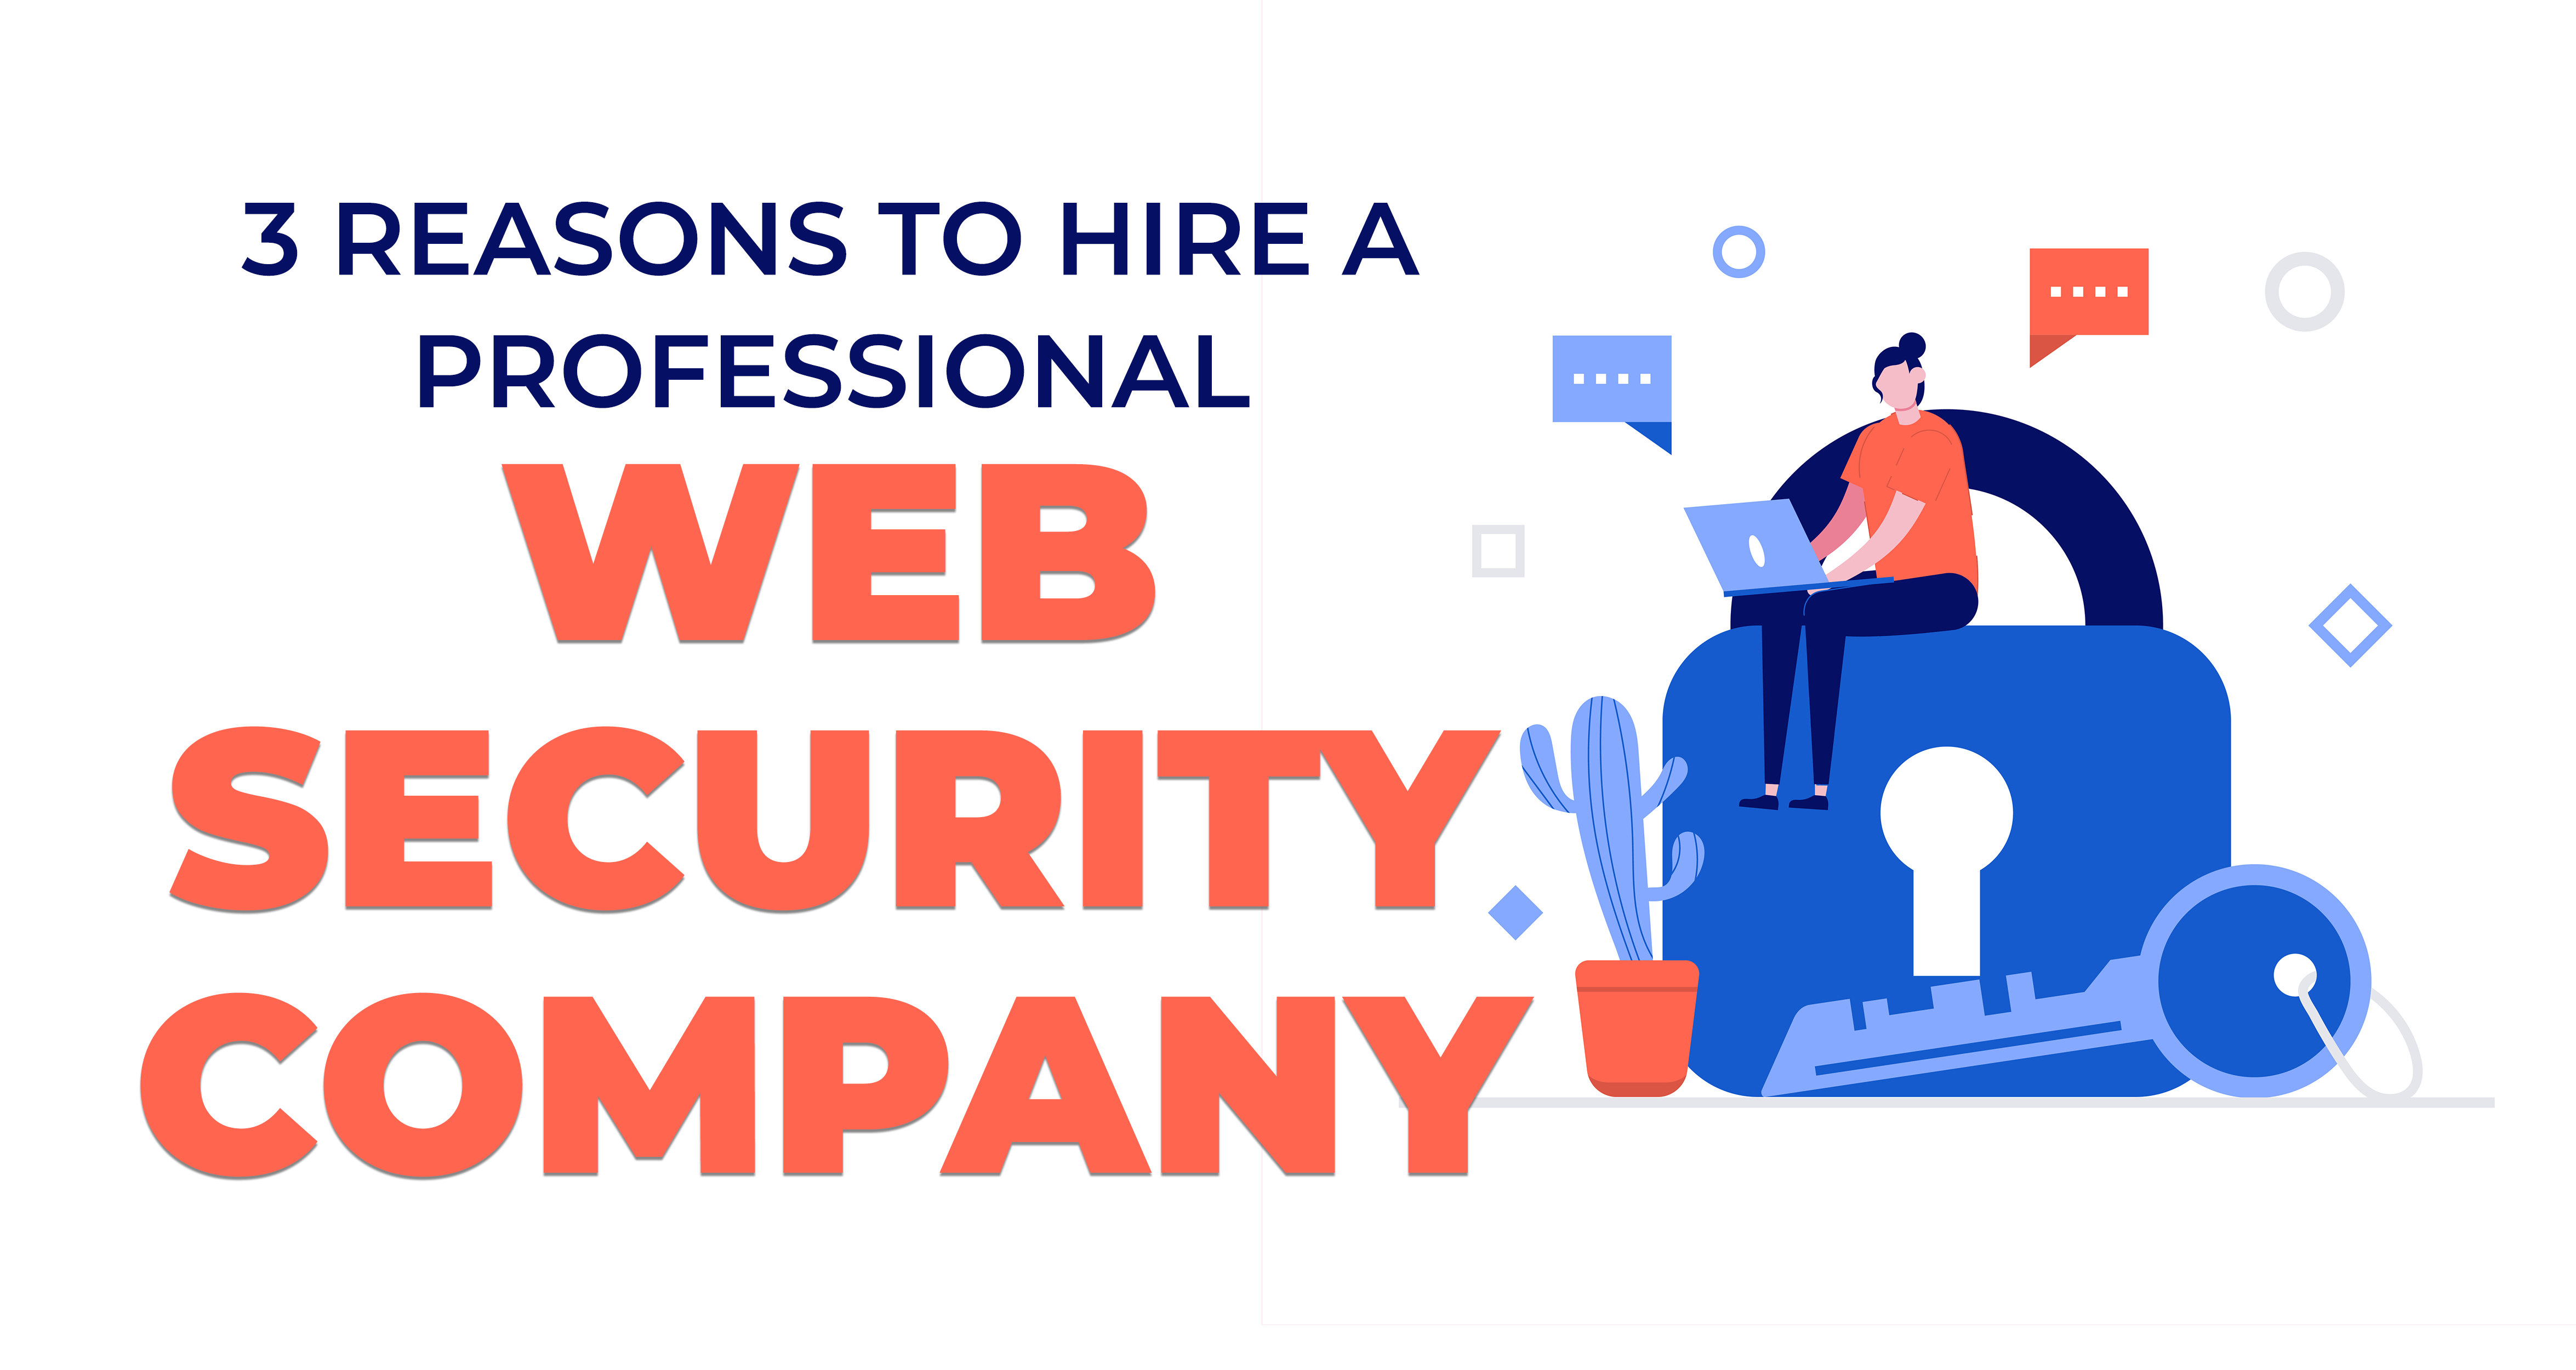 3 Reasons to Hire a Professional Web Security Company